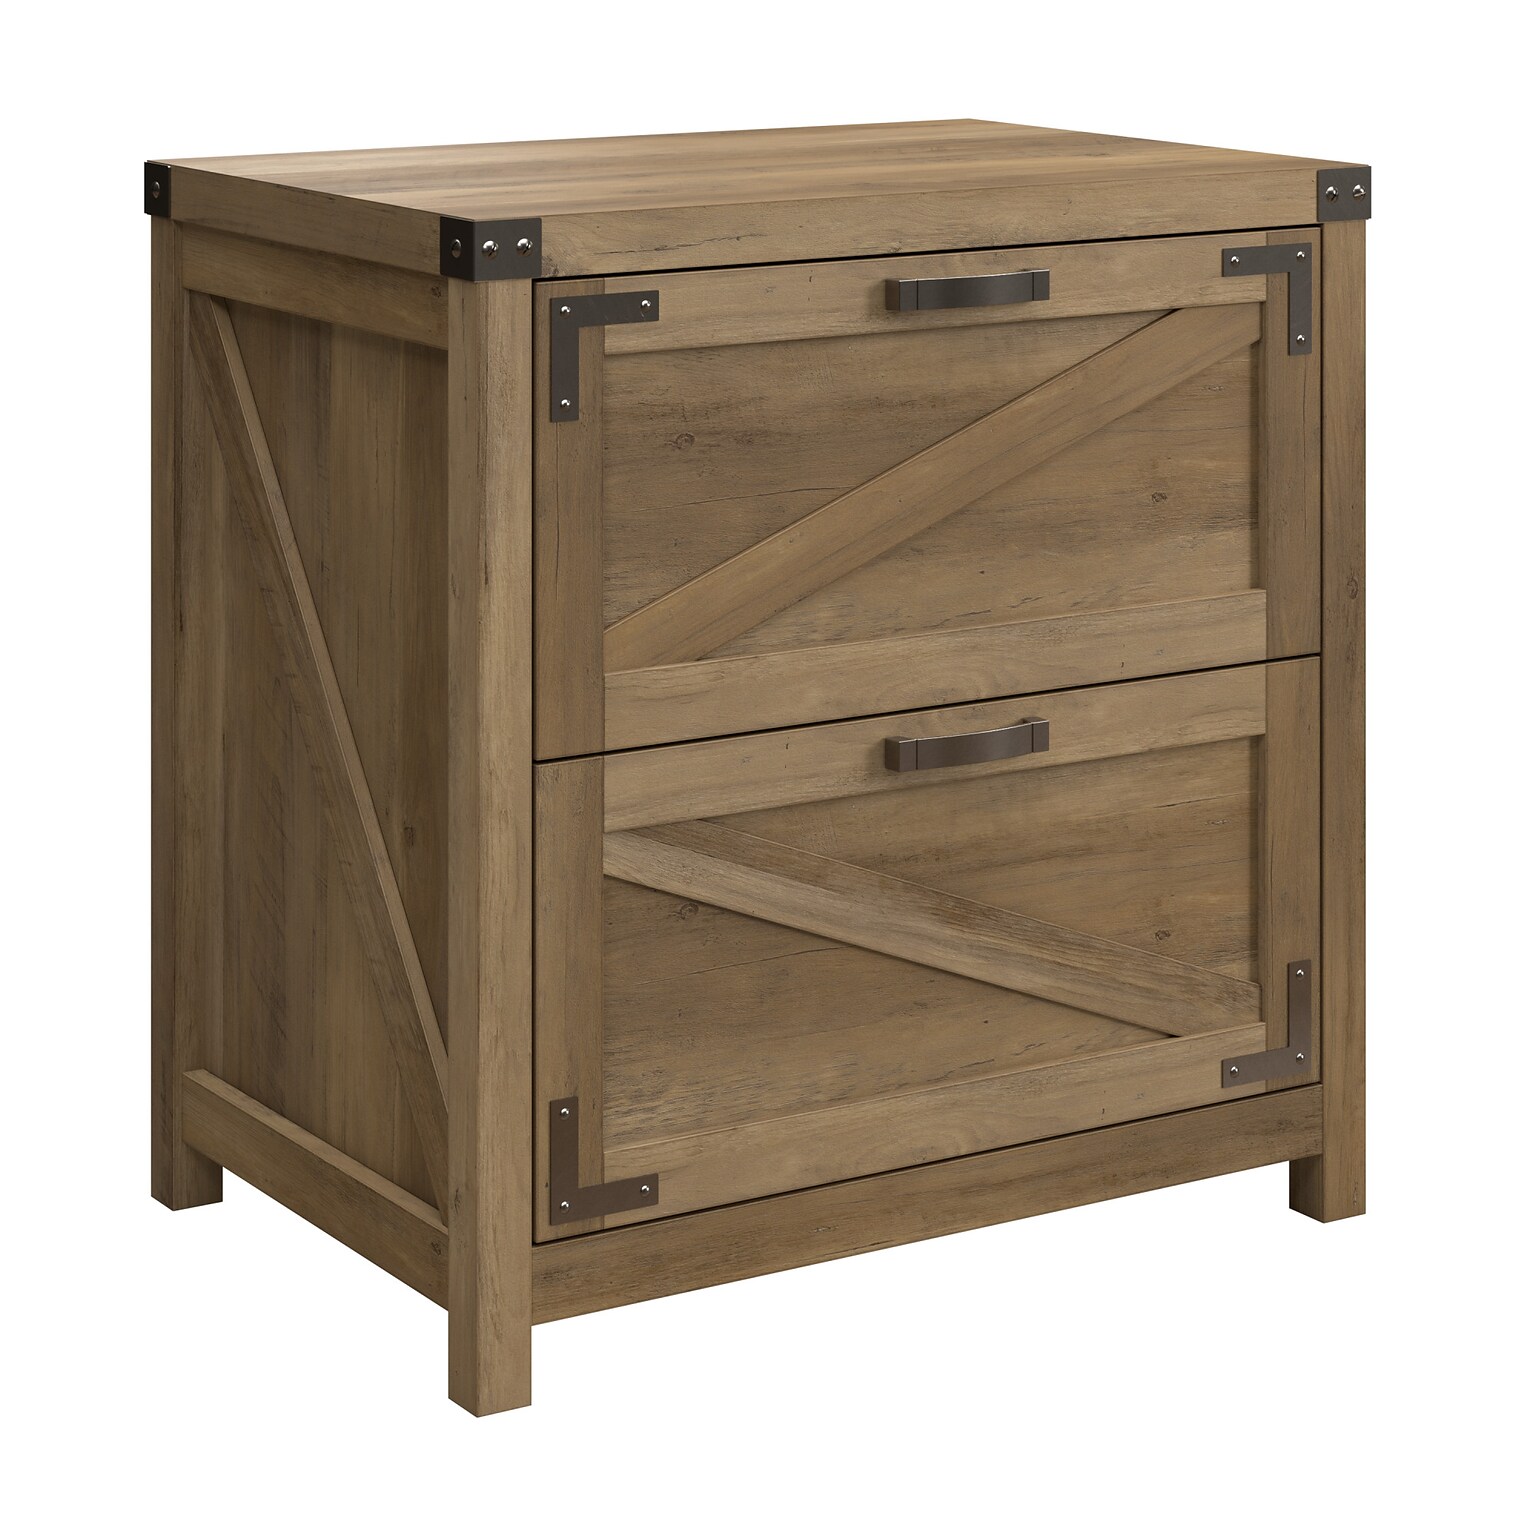 Bush Furniture Knoxville 2-Drawer Lateral File Cabinet, Reclaimed Pine (CGF129RCP-03)